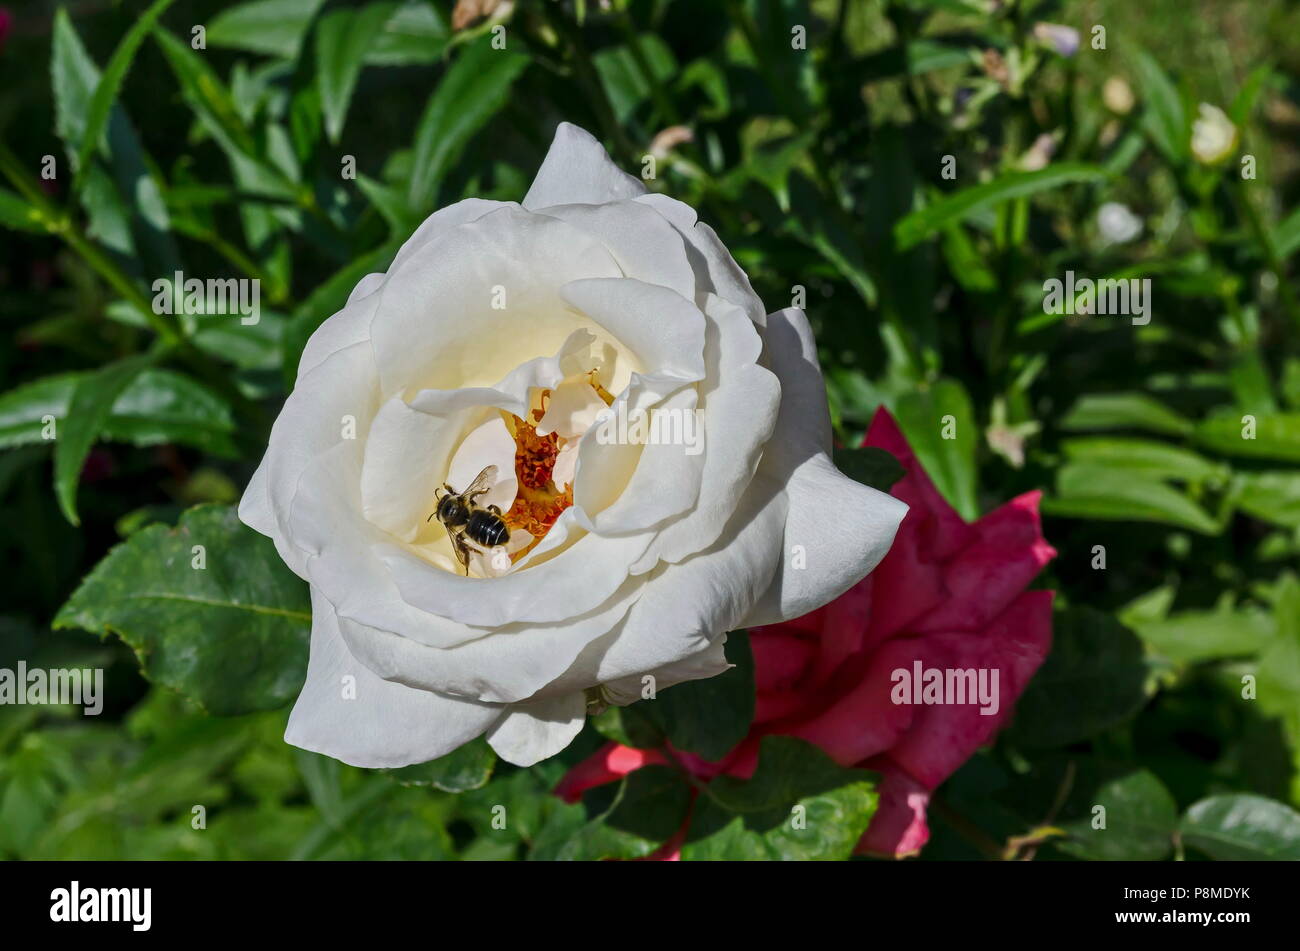 Macro close up of honey bee collecting pollen from white rose flower, Sofia, Bulgaria Stock Photo